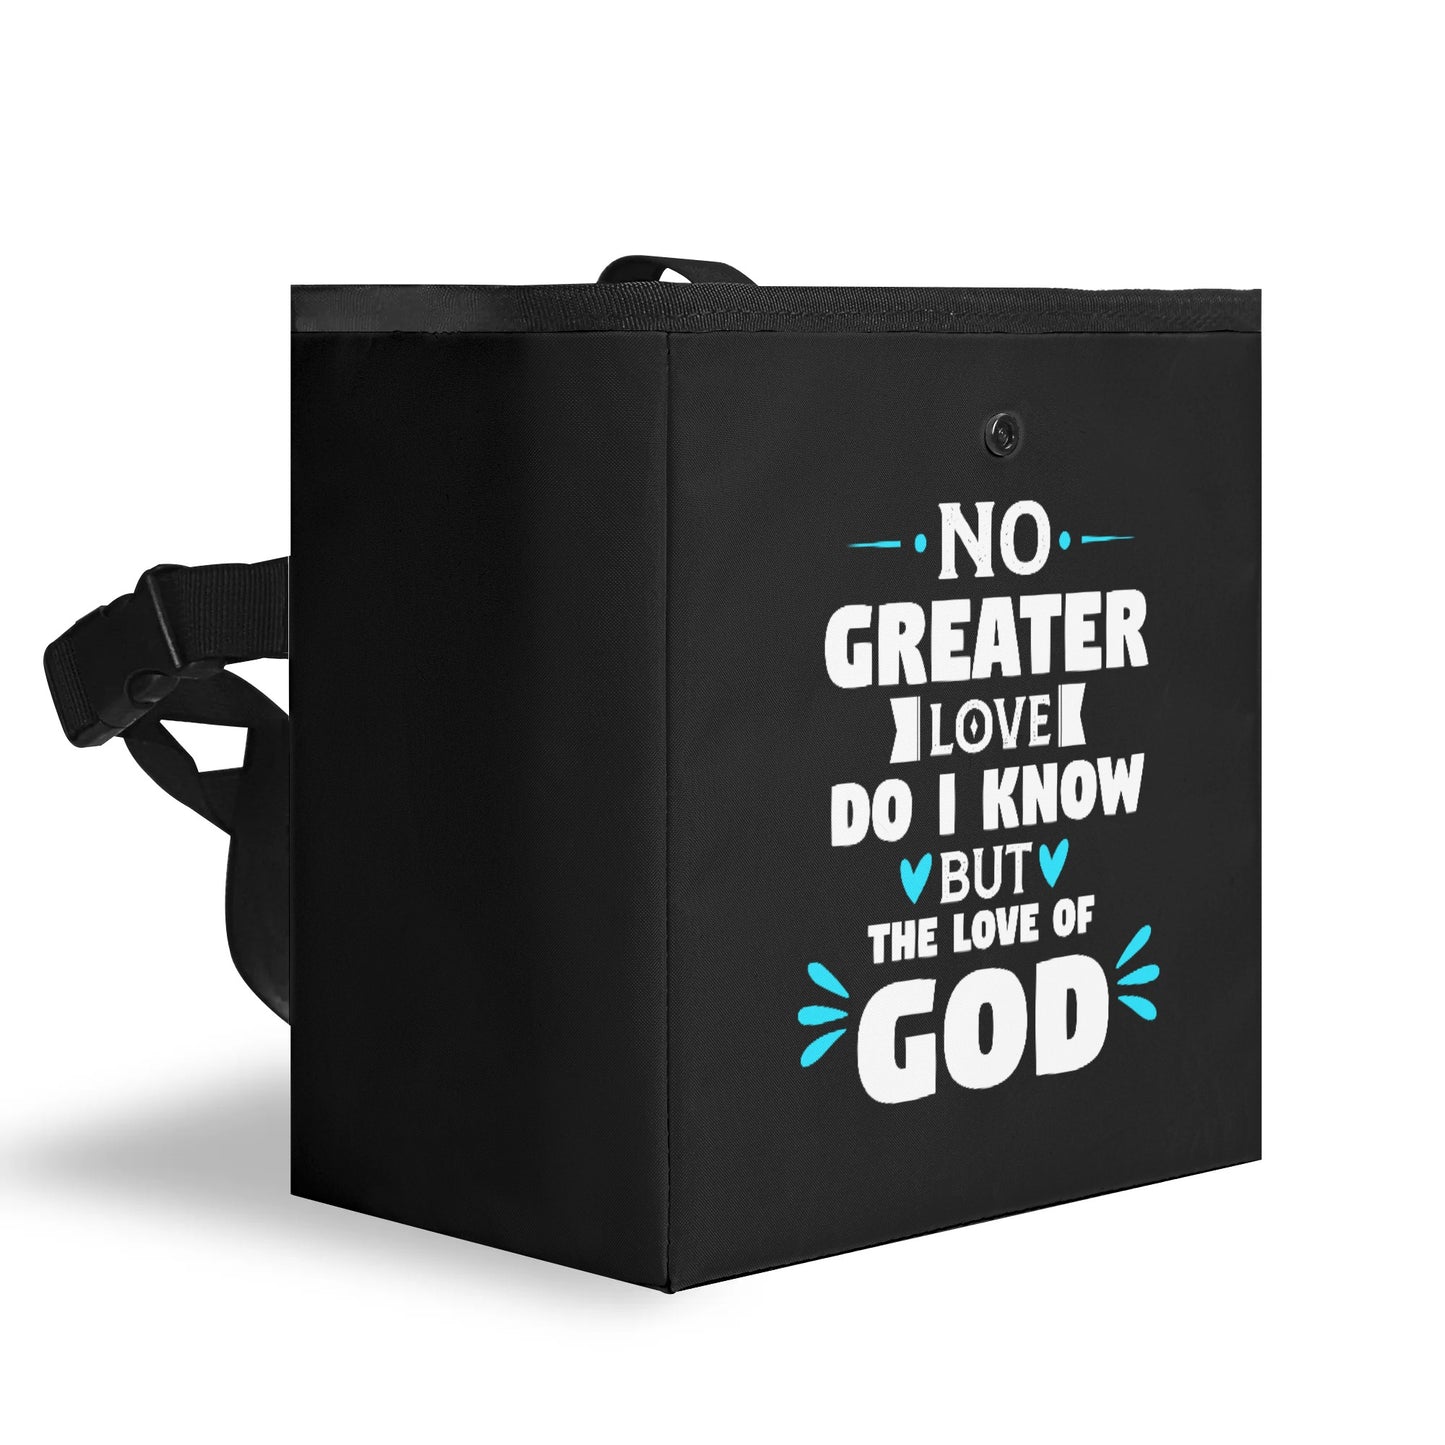 No Greater Love Do I Know But The Love Of God Hanging Storage Trash Car Organizer Bag Christian Car Accessories popcustoms